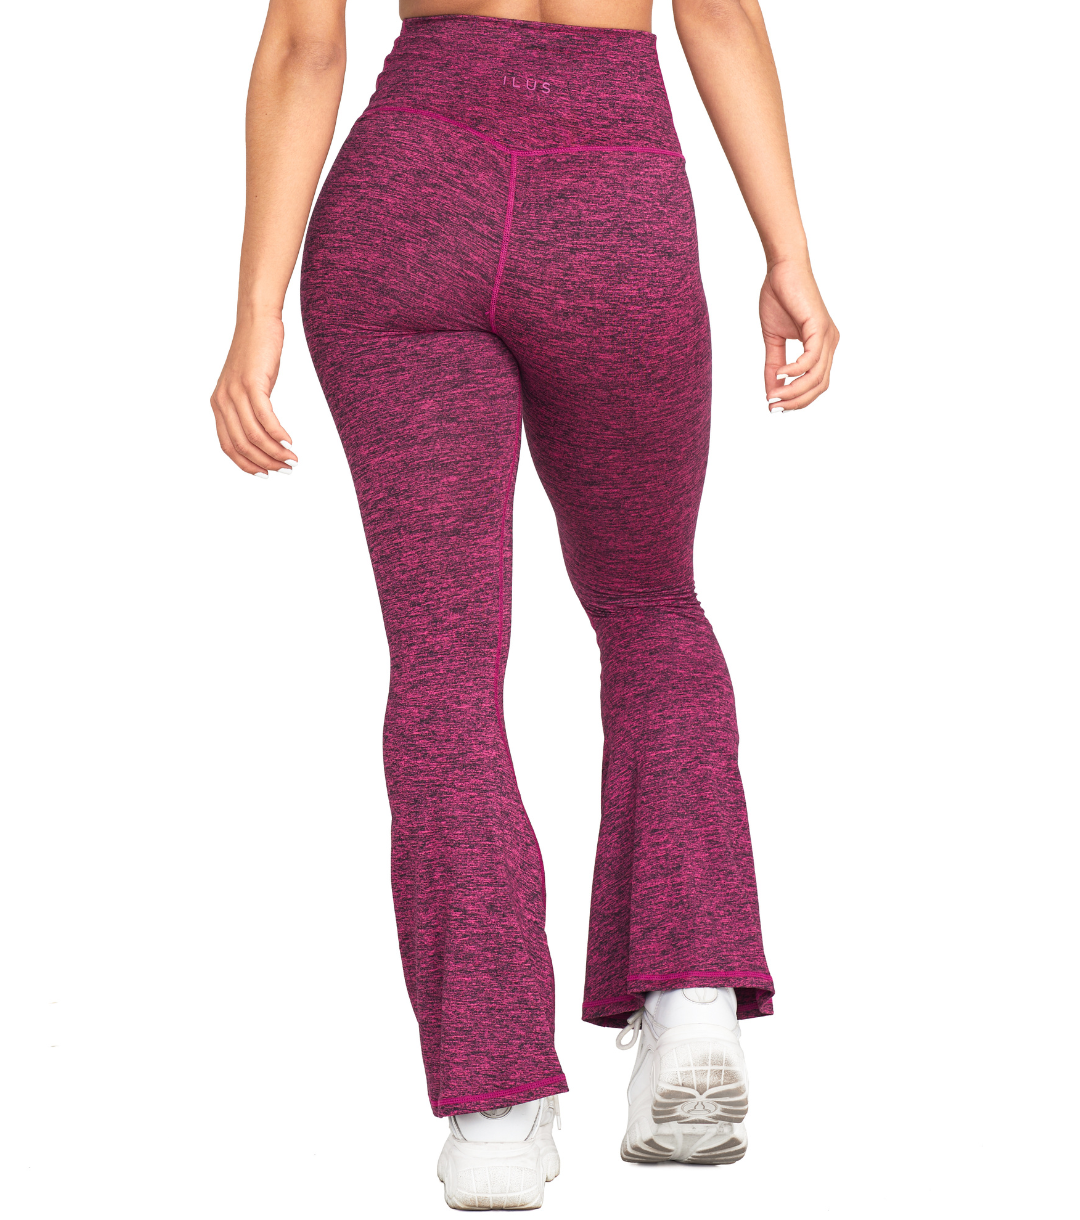 CINCHED CROSS OVER FLARE LEGGINGS